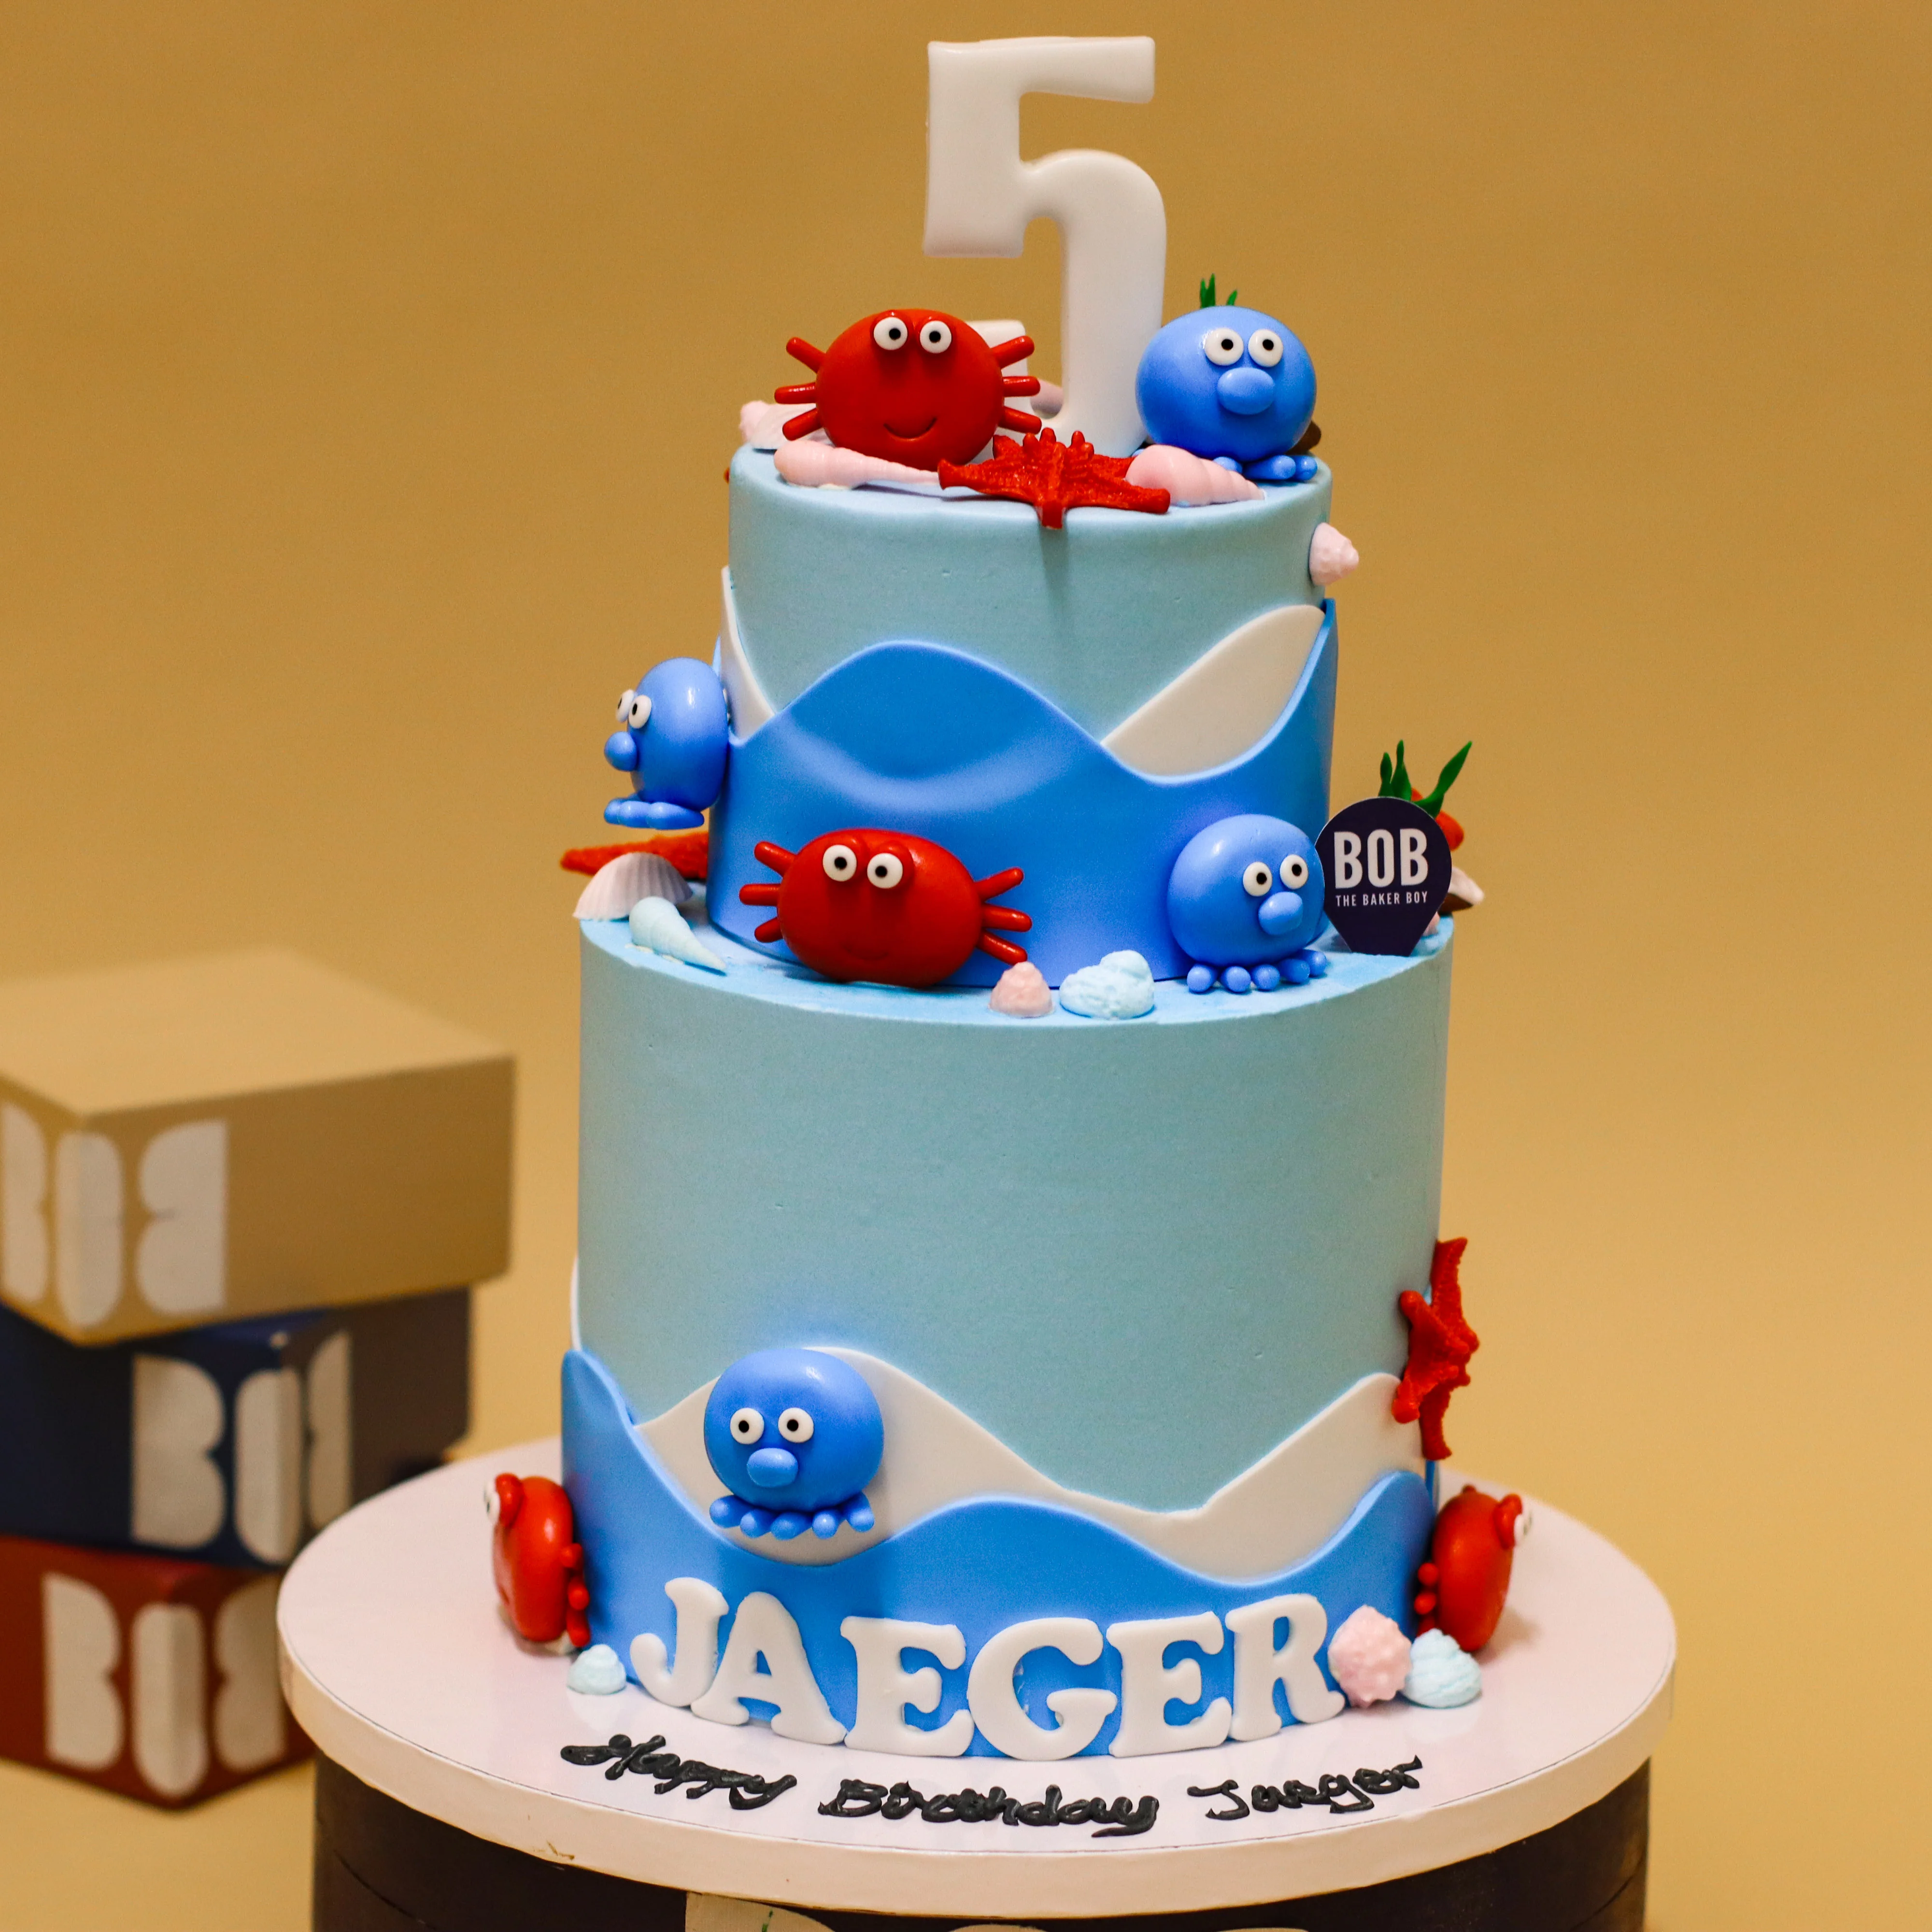 Nautical Under The Sea Cake With Crabs